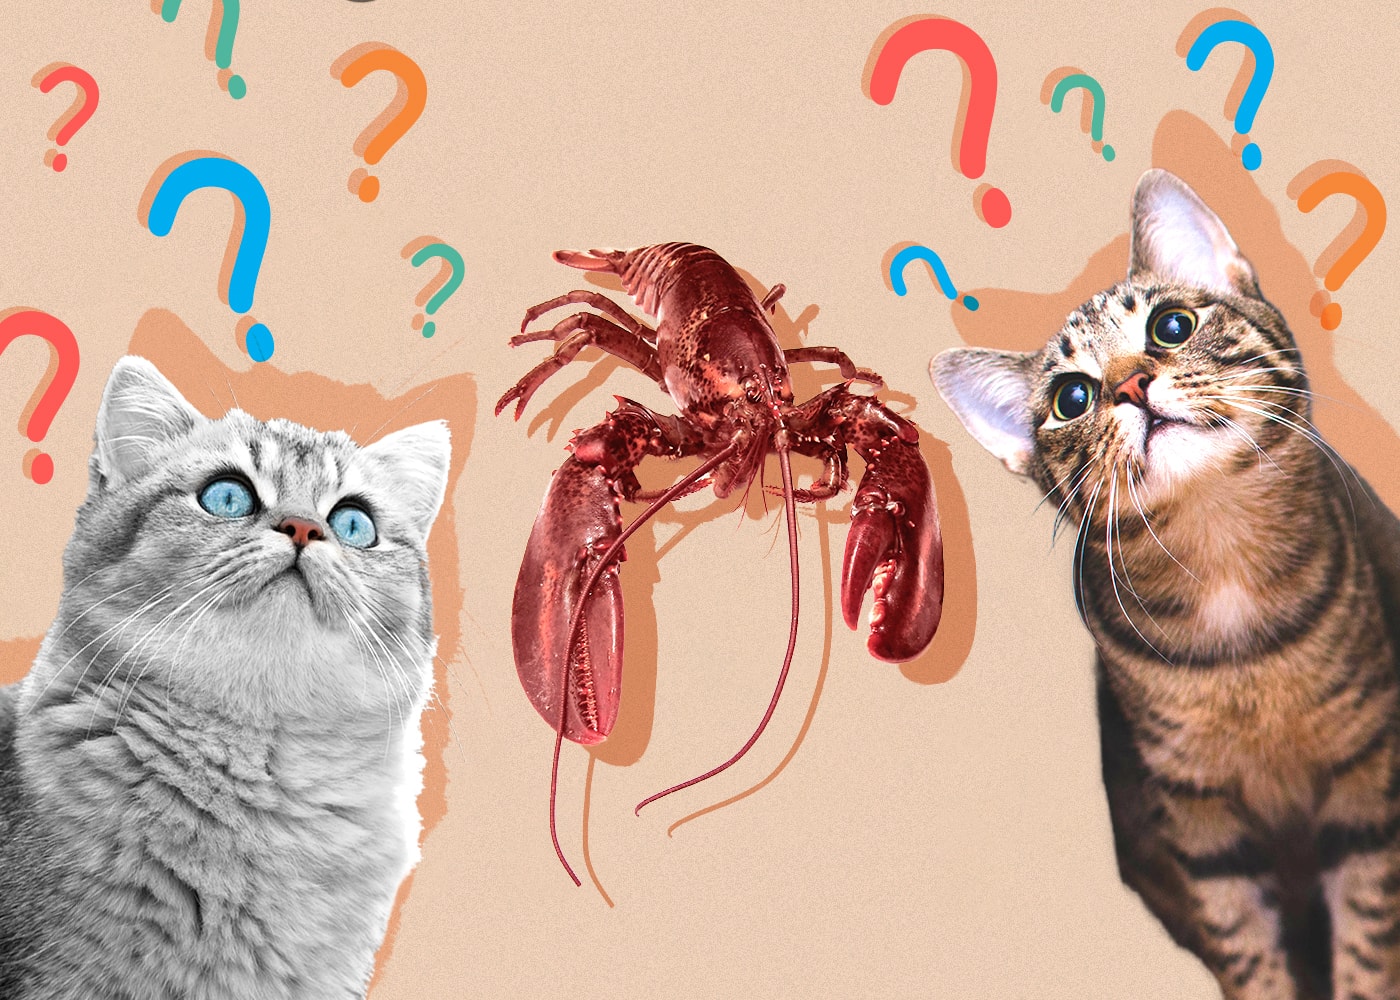 Can Cats Eat Lobster